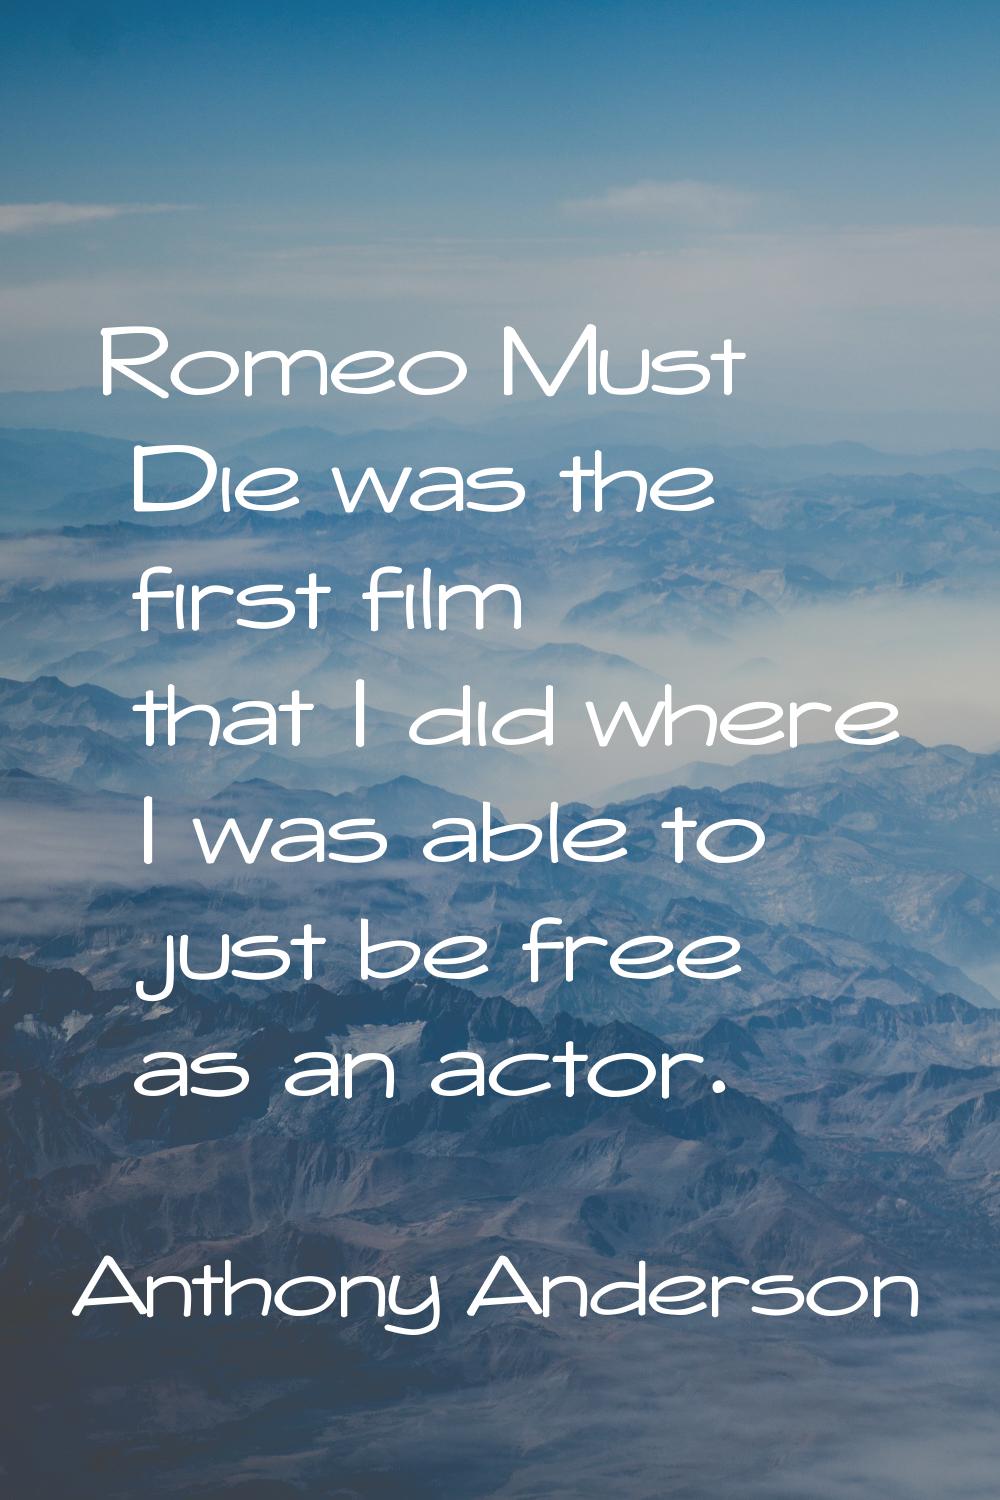 Romeo Must Die was the first film that I did where I was able to just be free as an actor.